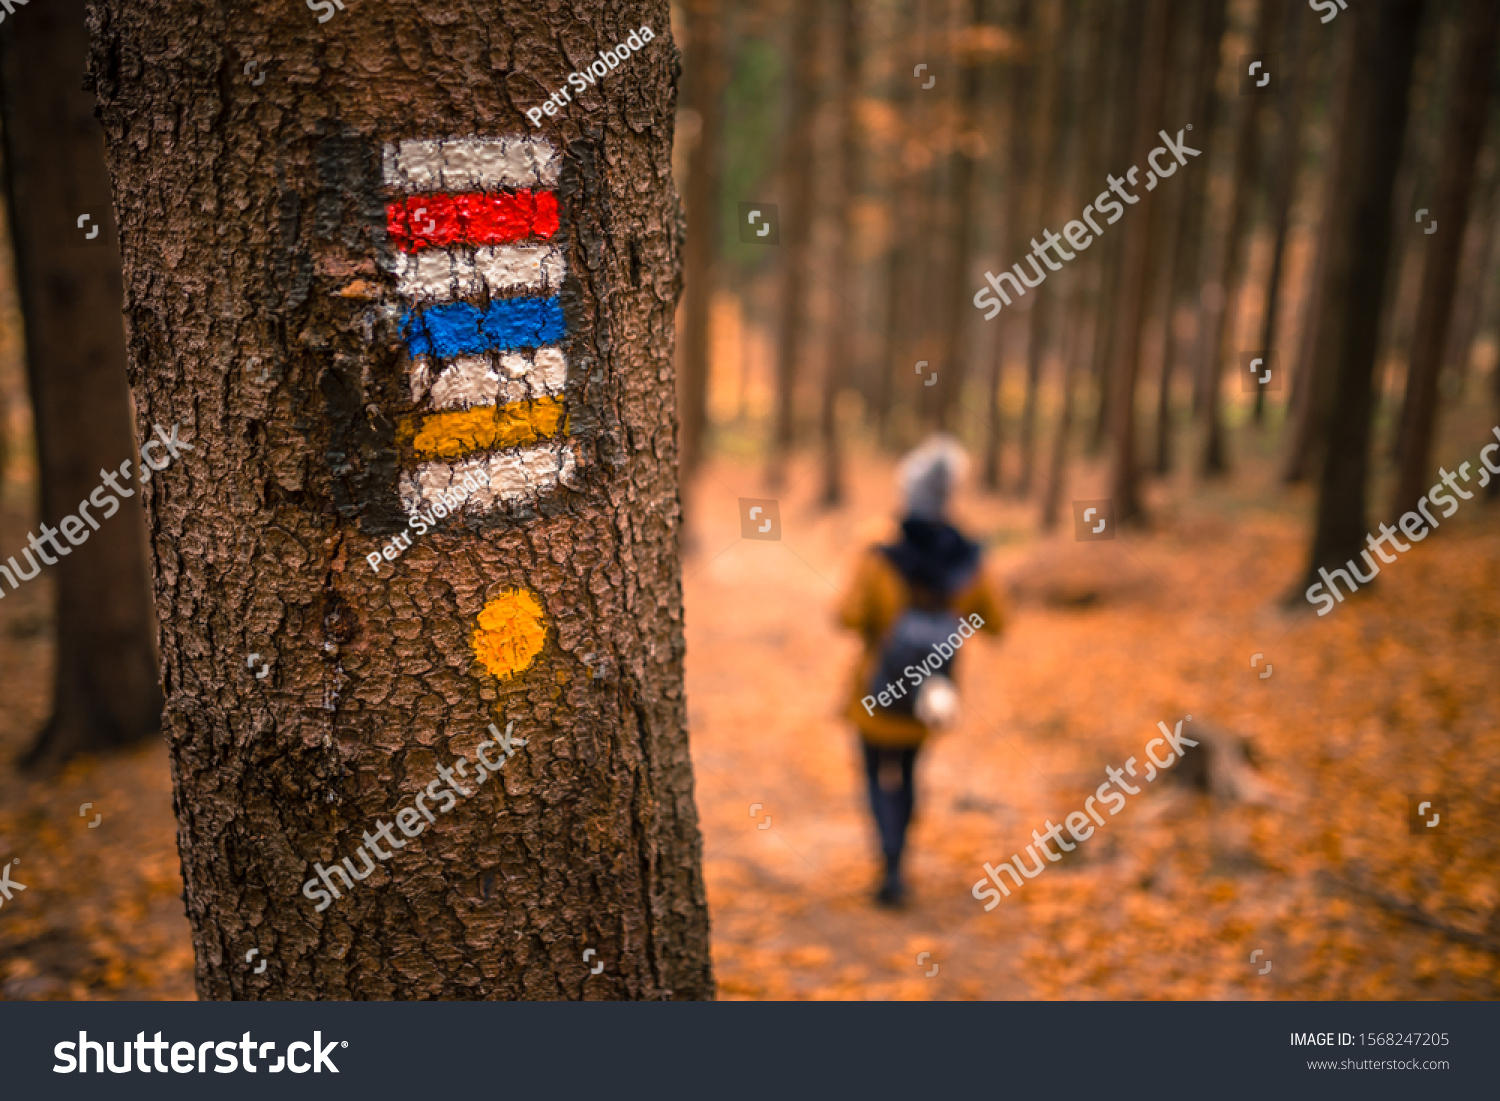 Touristic sign or mark on tree next to touristic path with female tourist in background. Nice autumn scene. Forrest trail. #1568247205